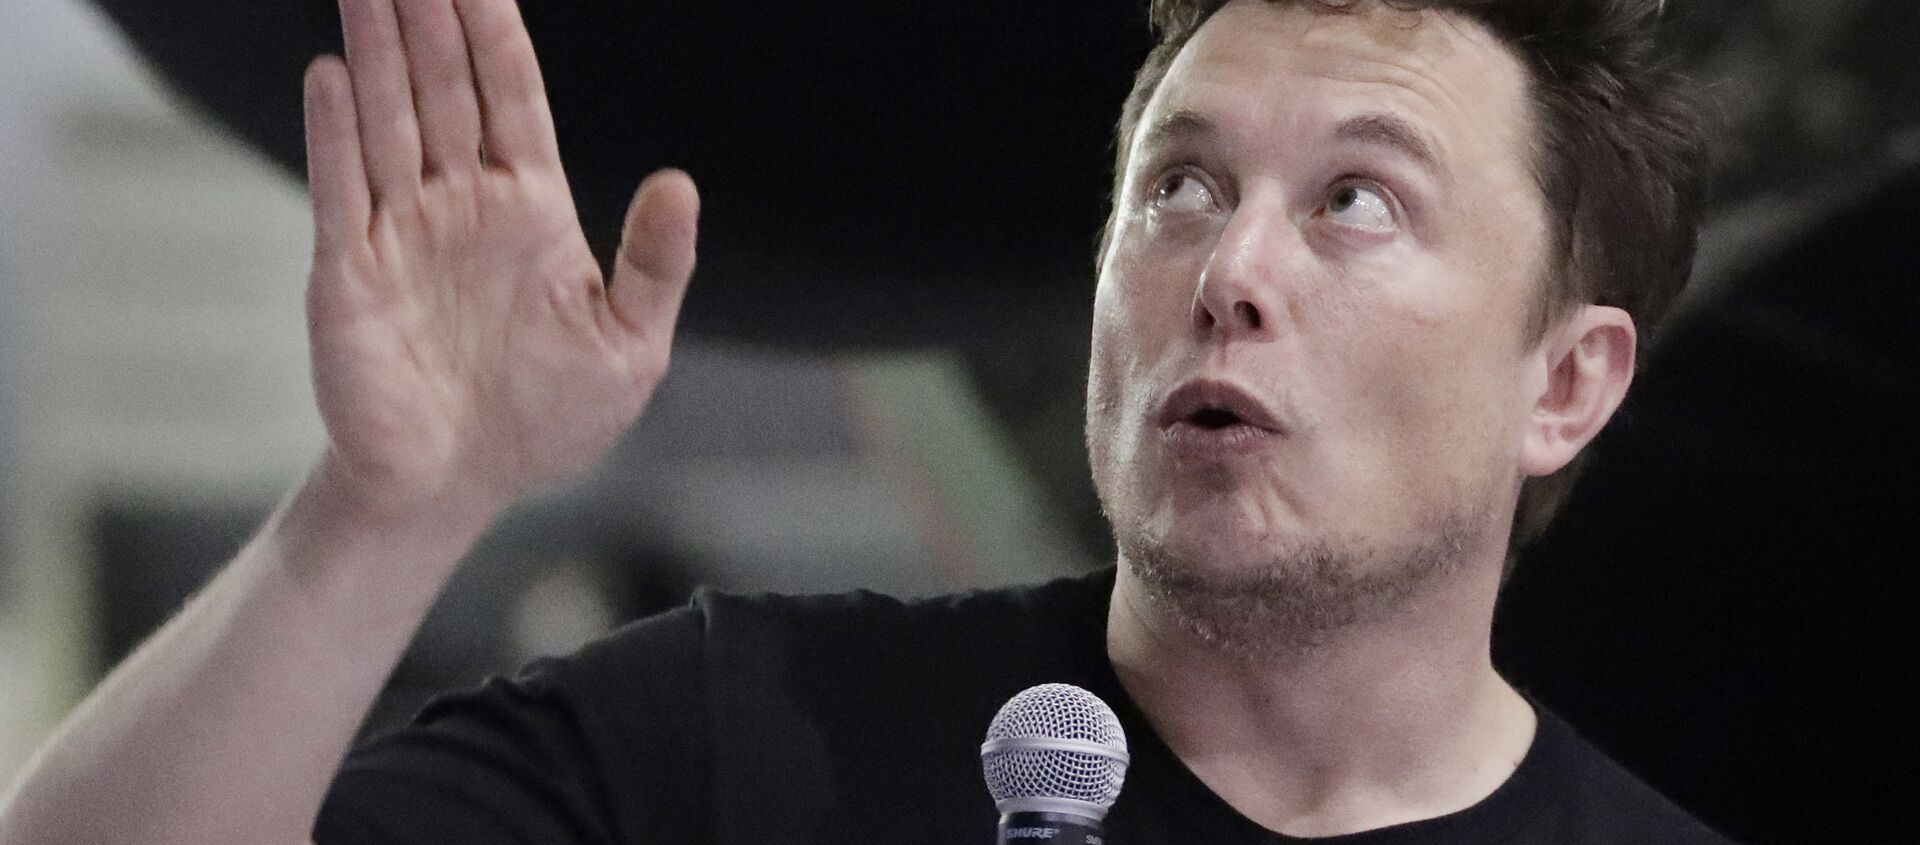 SpaceX founder and chief executive Elon Musk speaks after announcing Japanese billionaire Yusaku Maezawa as the first private passenger on a trip around the moon, Monday, Sept. 17, 2018, in Hawthorne, Calif - Sputnik International, 1920, 08.03.2019